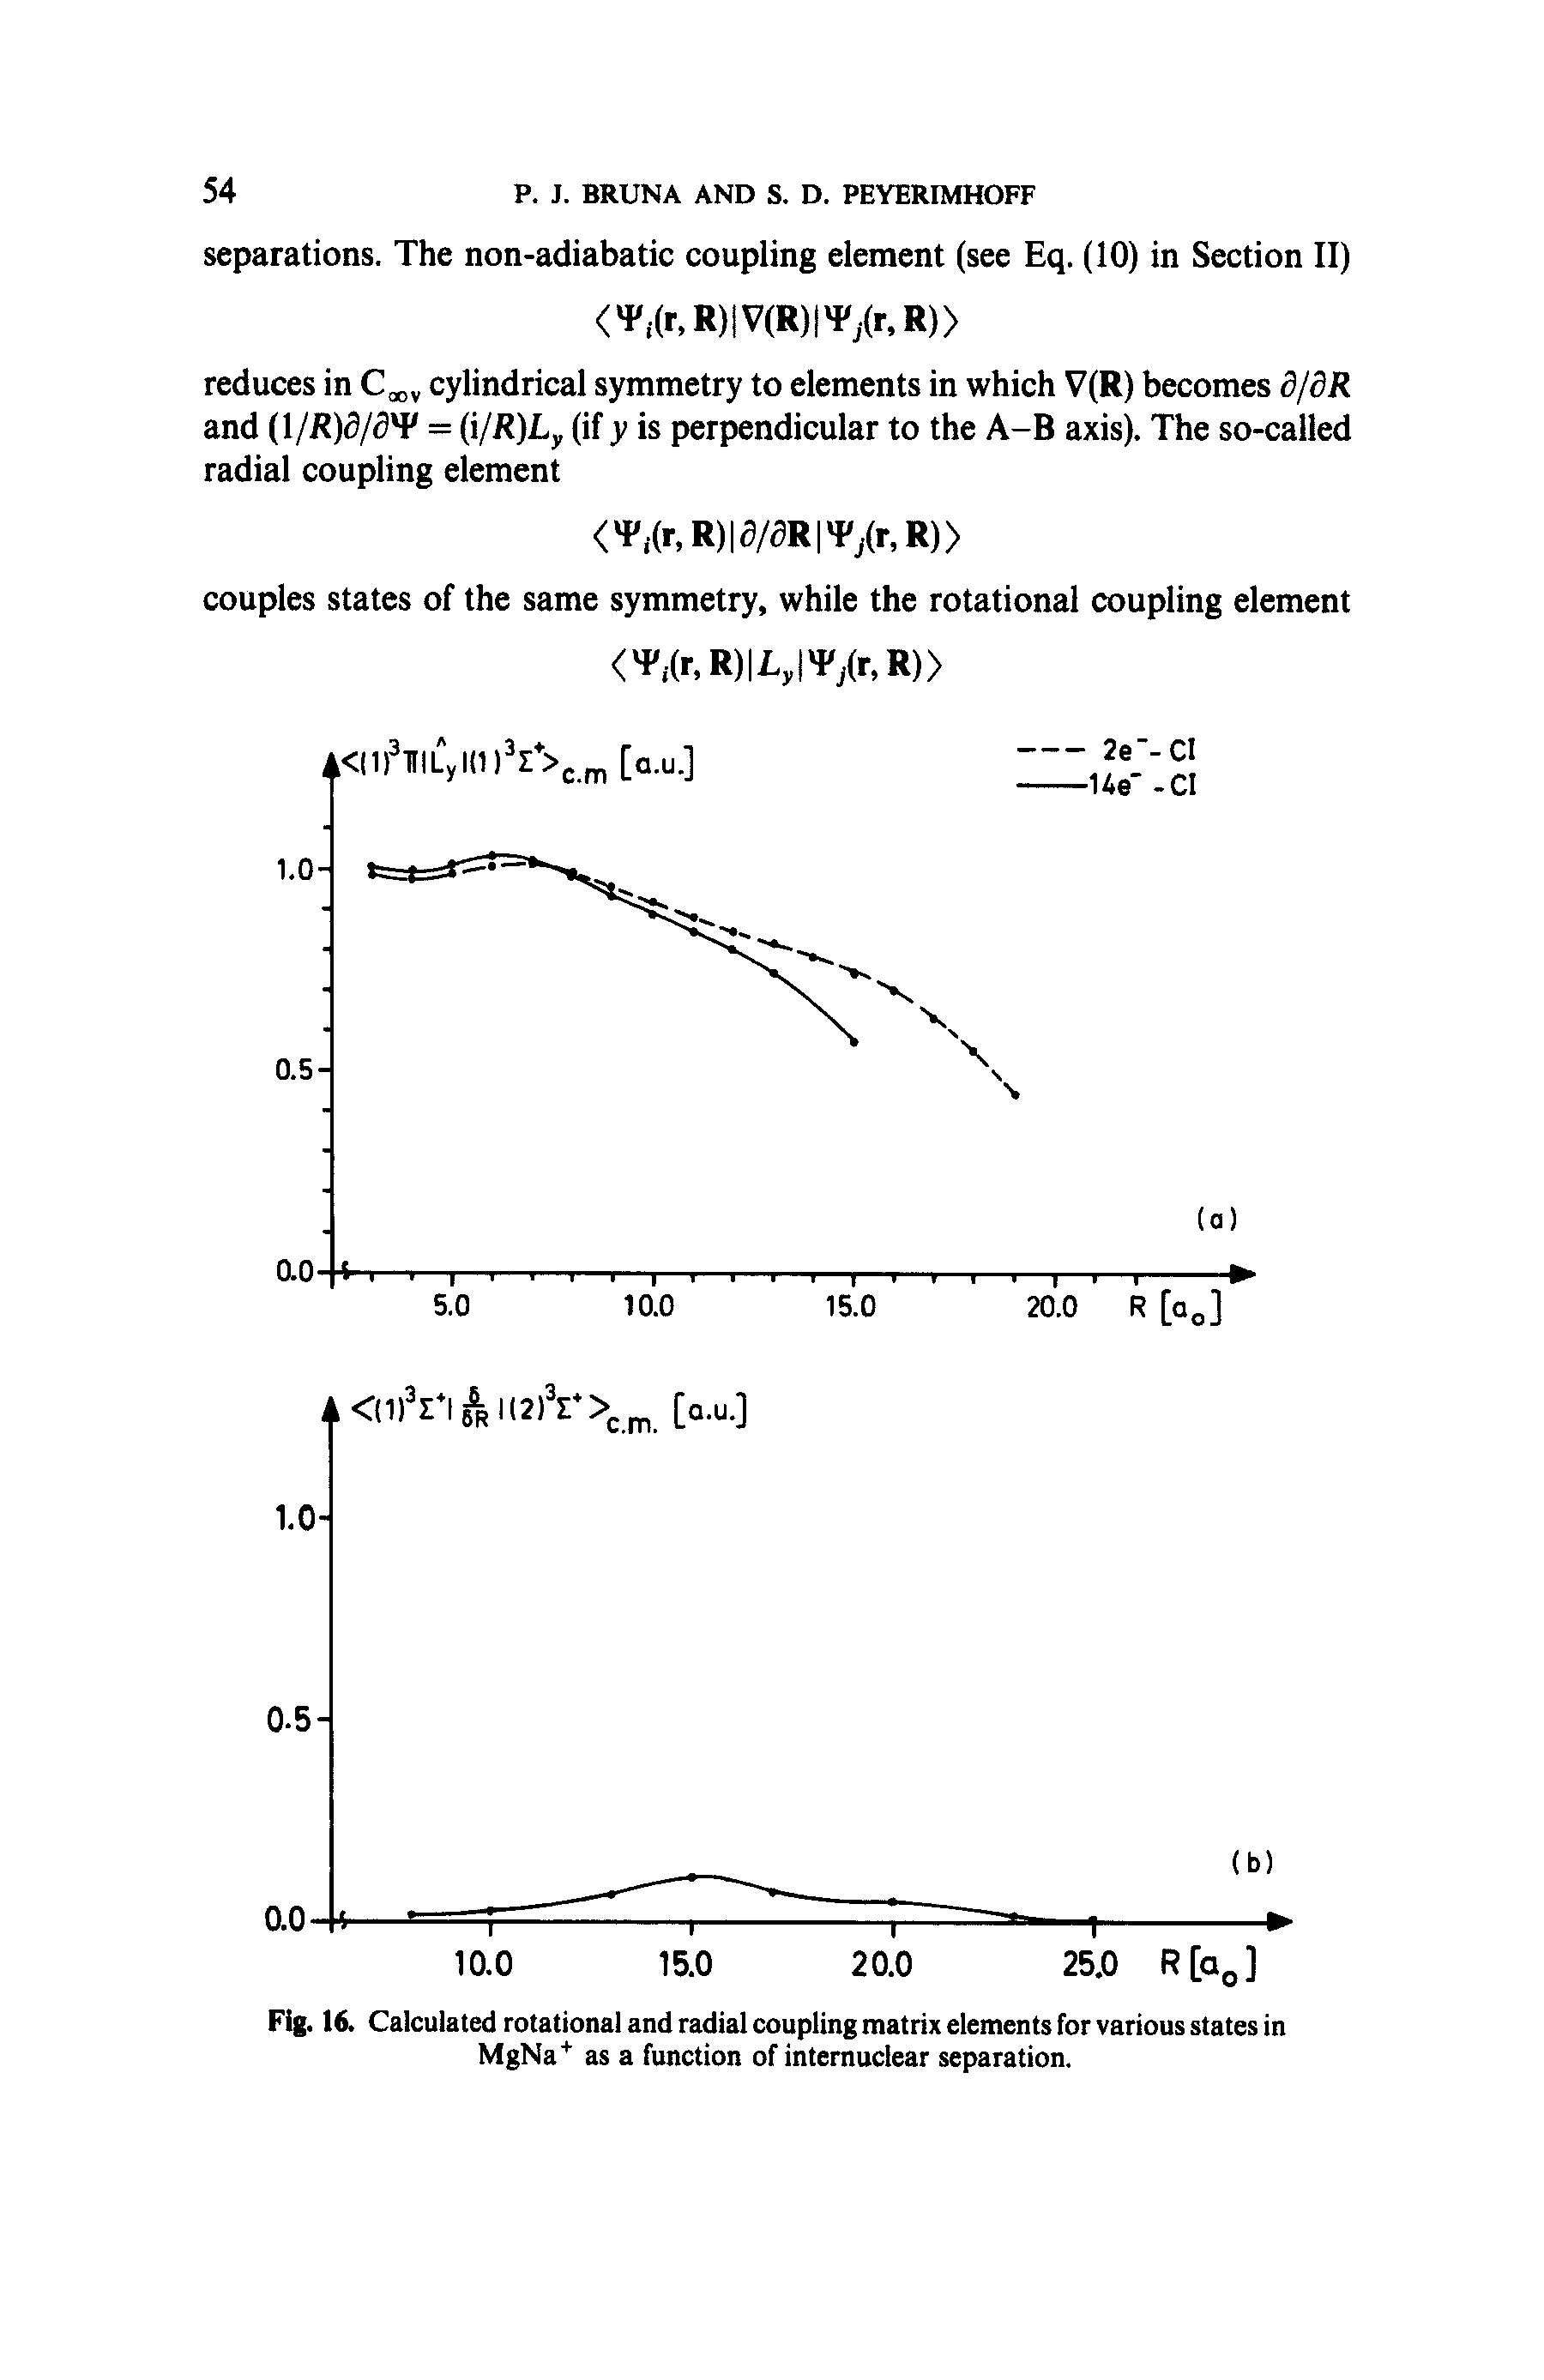 Fig. 16. Calculated rotational and radial coupling matrix elements for various states in MgNa as a function of intemudear separation.